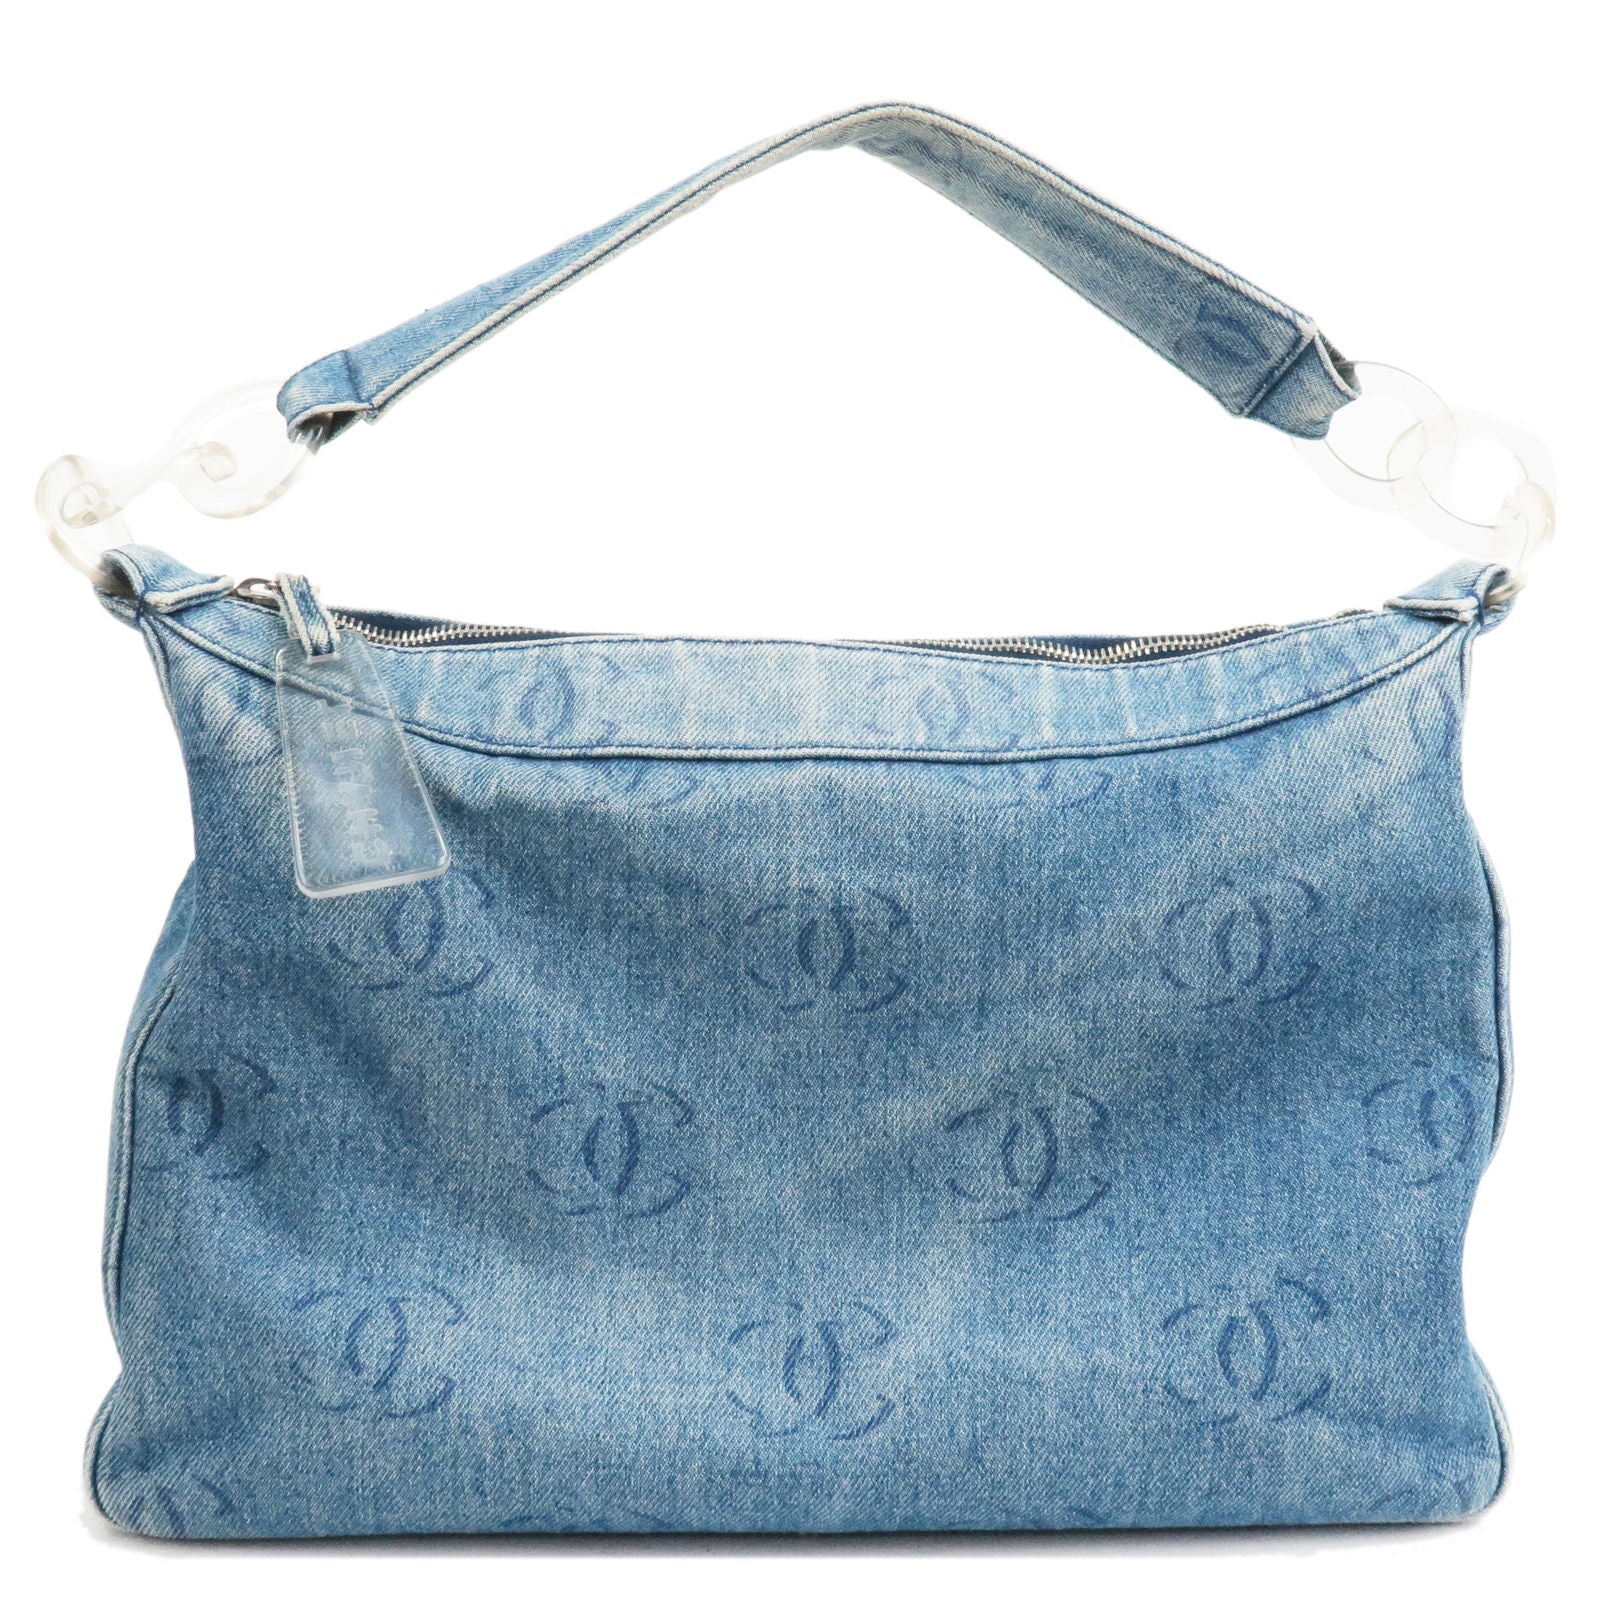 Chanel Pre-owned 1996-1997 Diamond-Quilted Denim Tote Bag